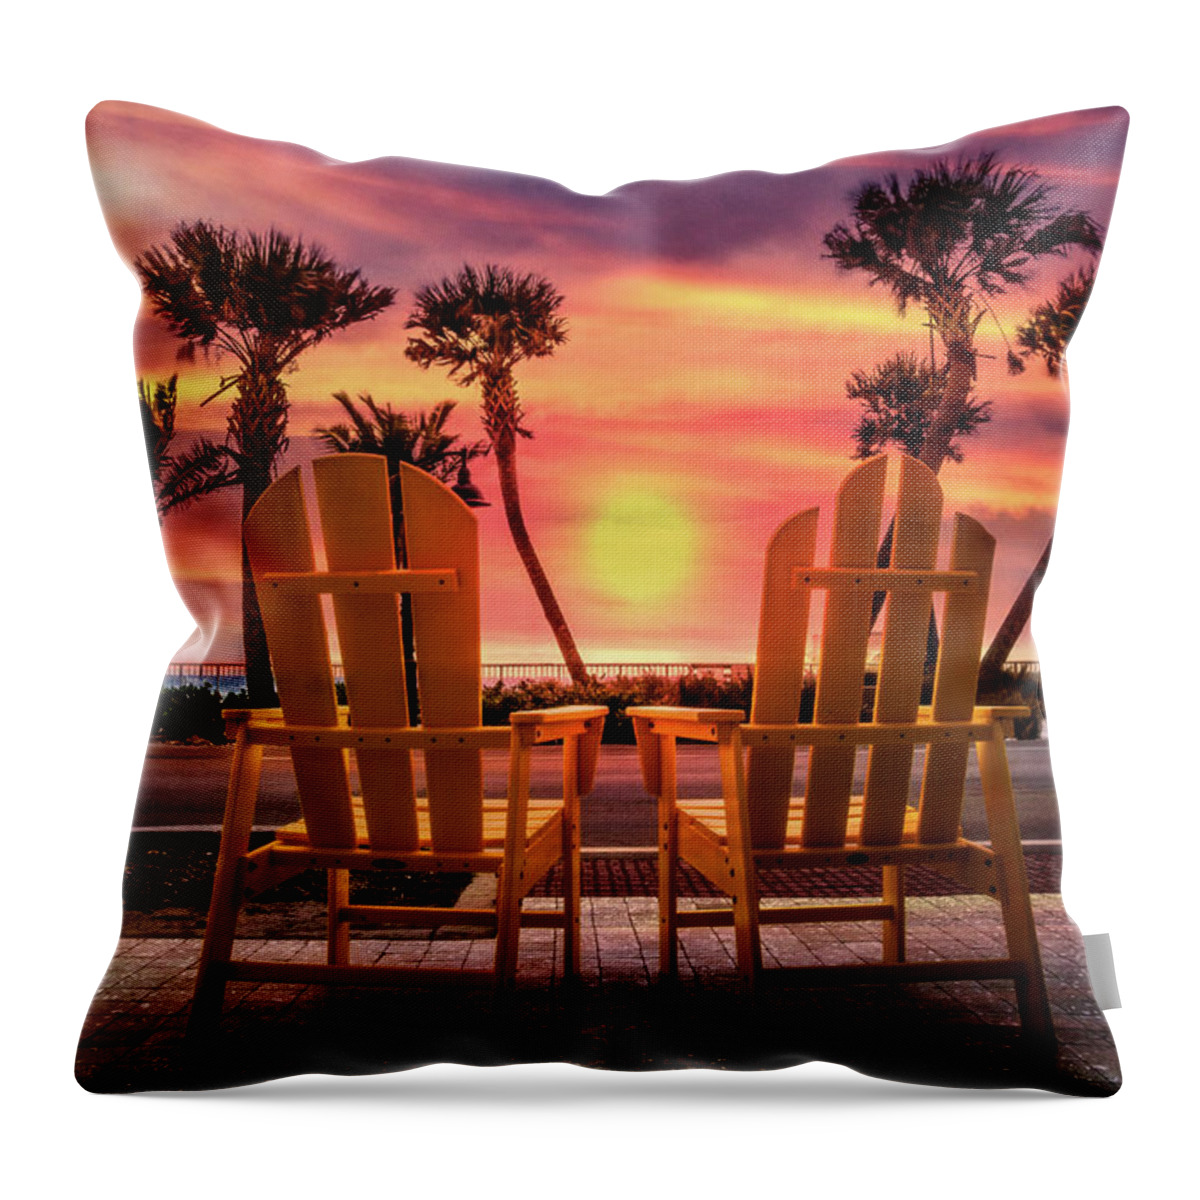 Clouds Throw Pillow featuring the photograph Just the Two of Us by Debra and Dave Vanderlaan